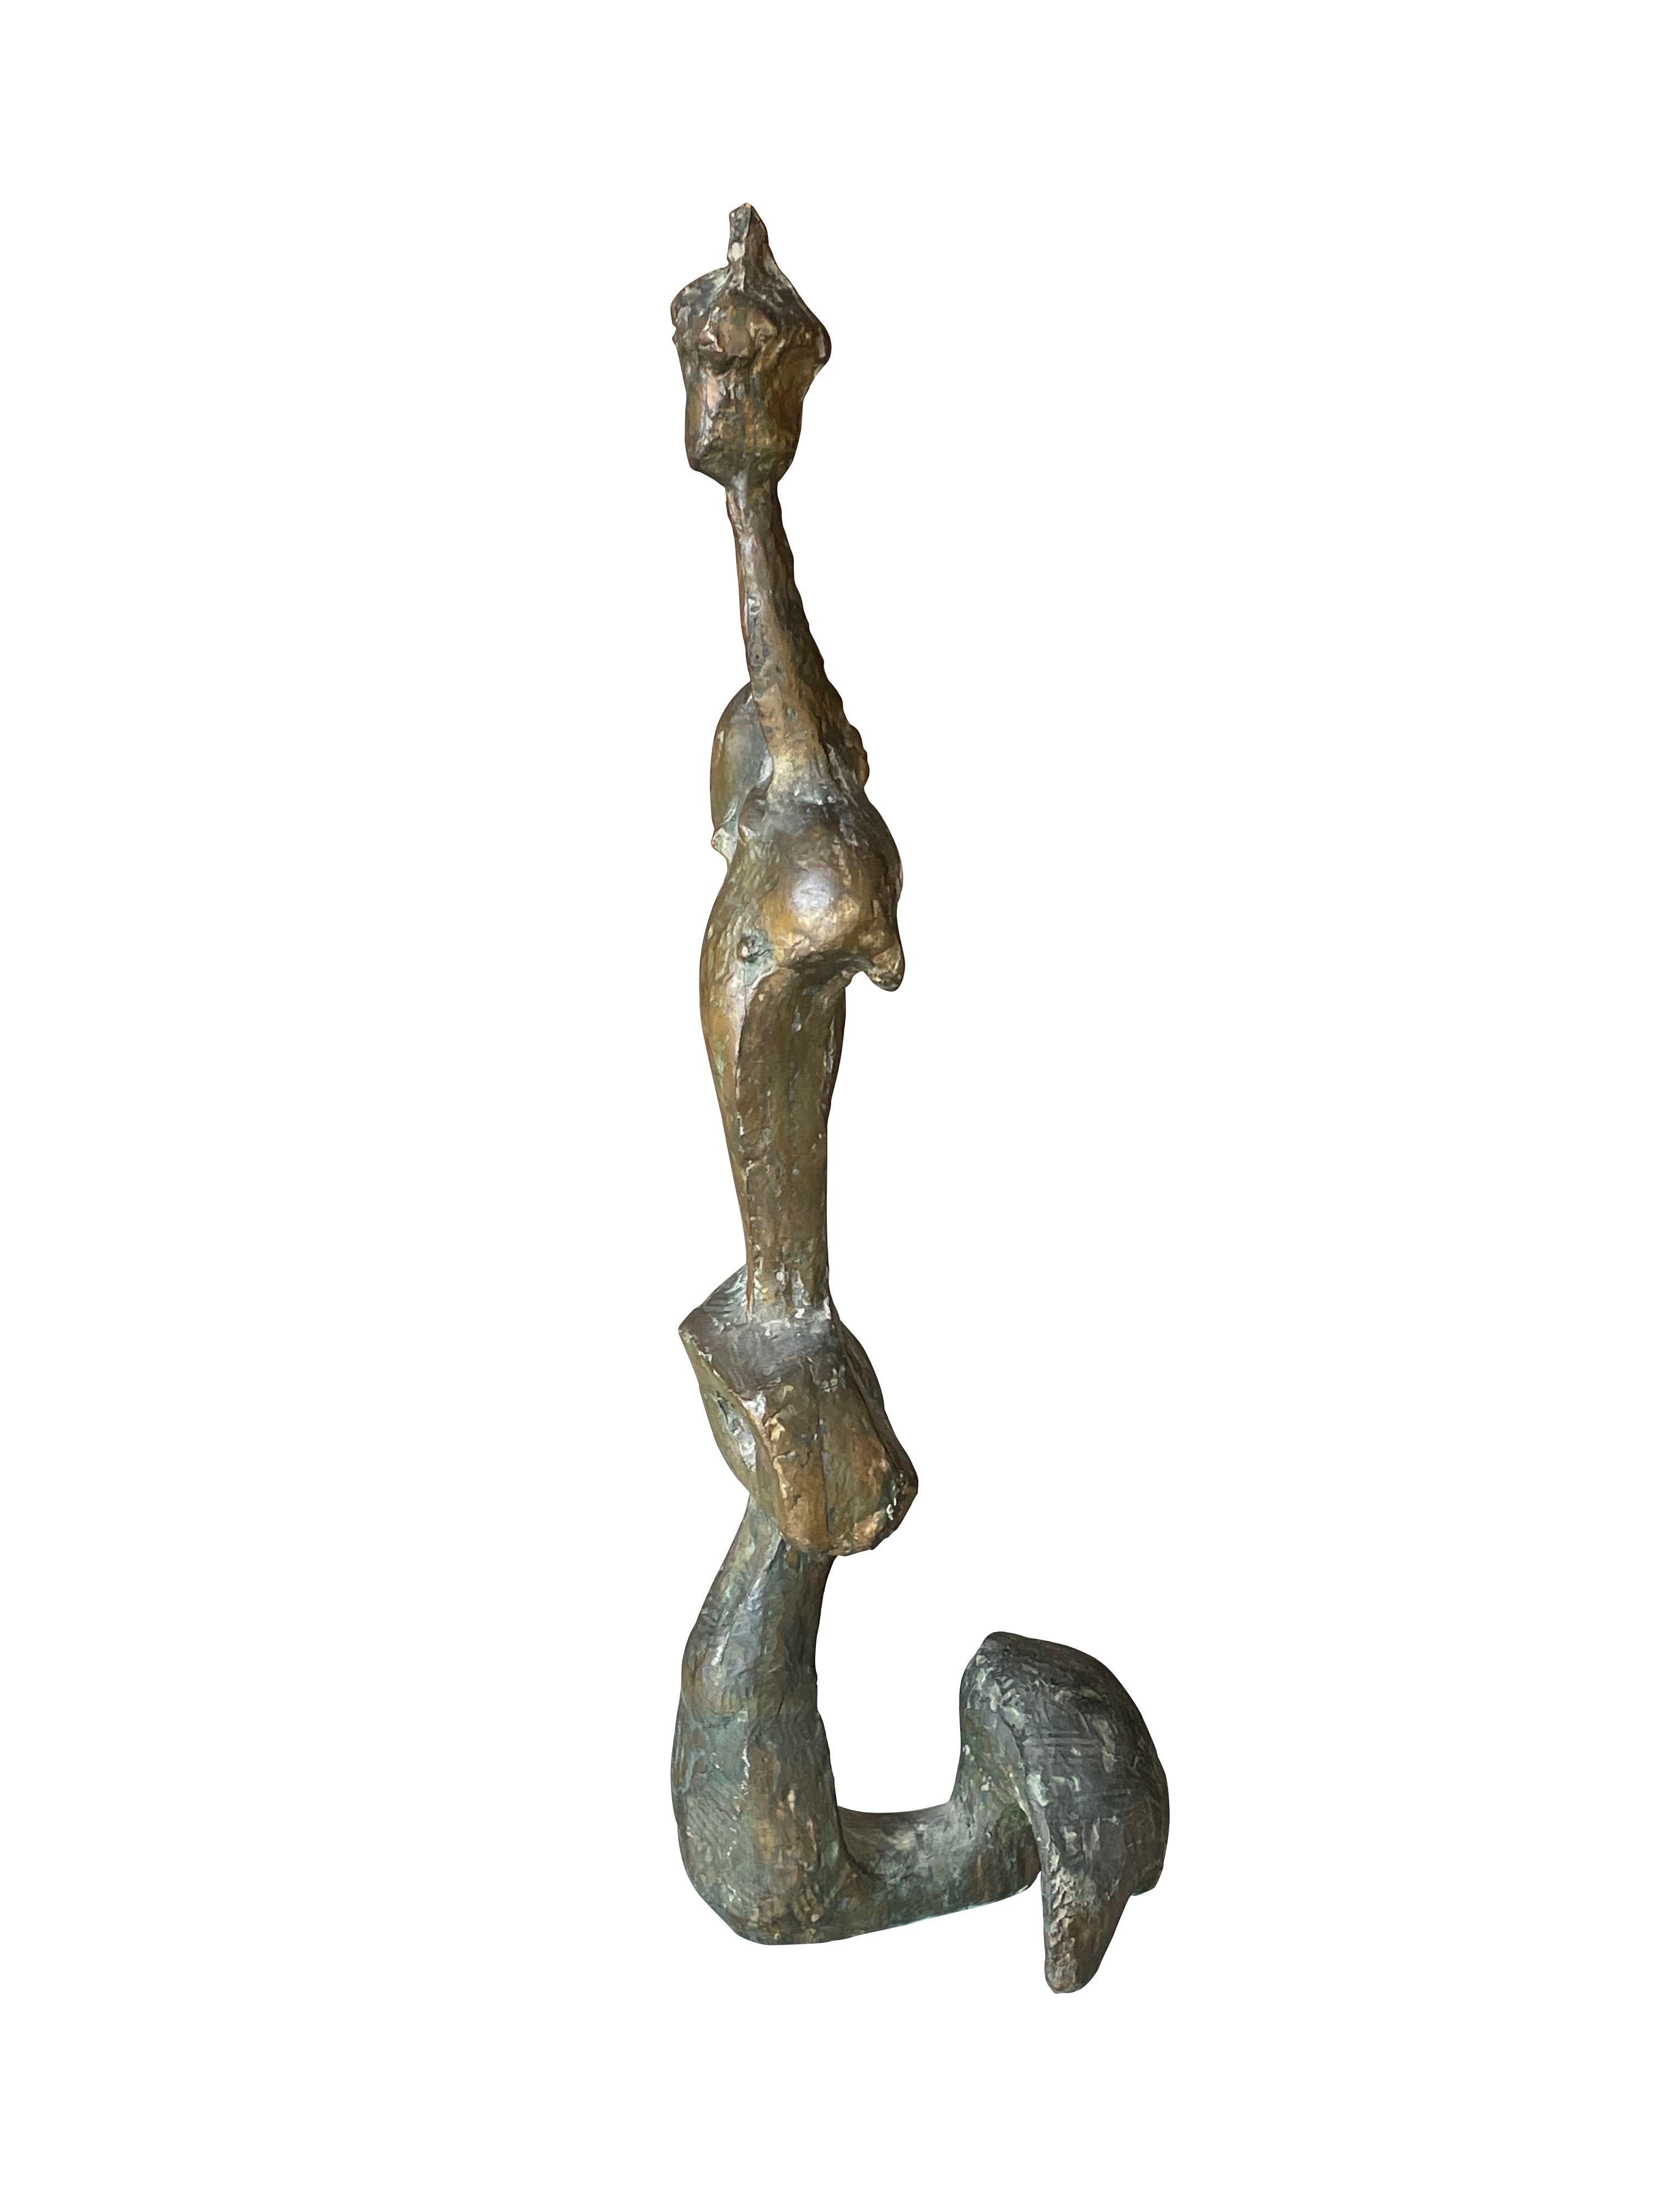 Signed V Chende in 1968 French bronze sculpture.
Free standing abstract figure.
ARRIVING NOVEMBER.